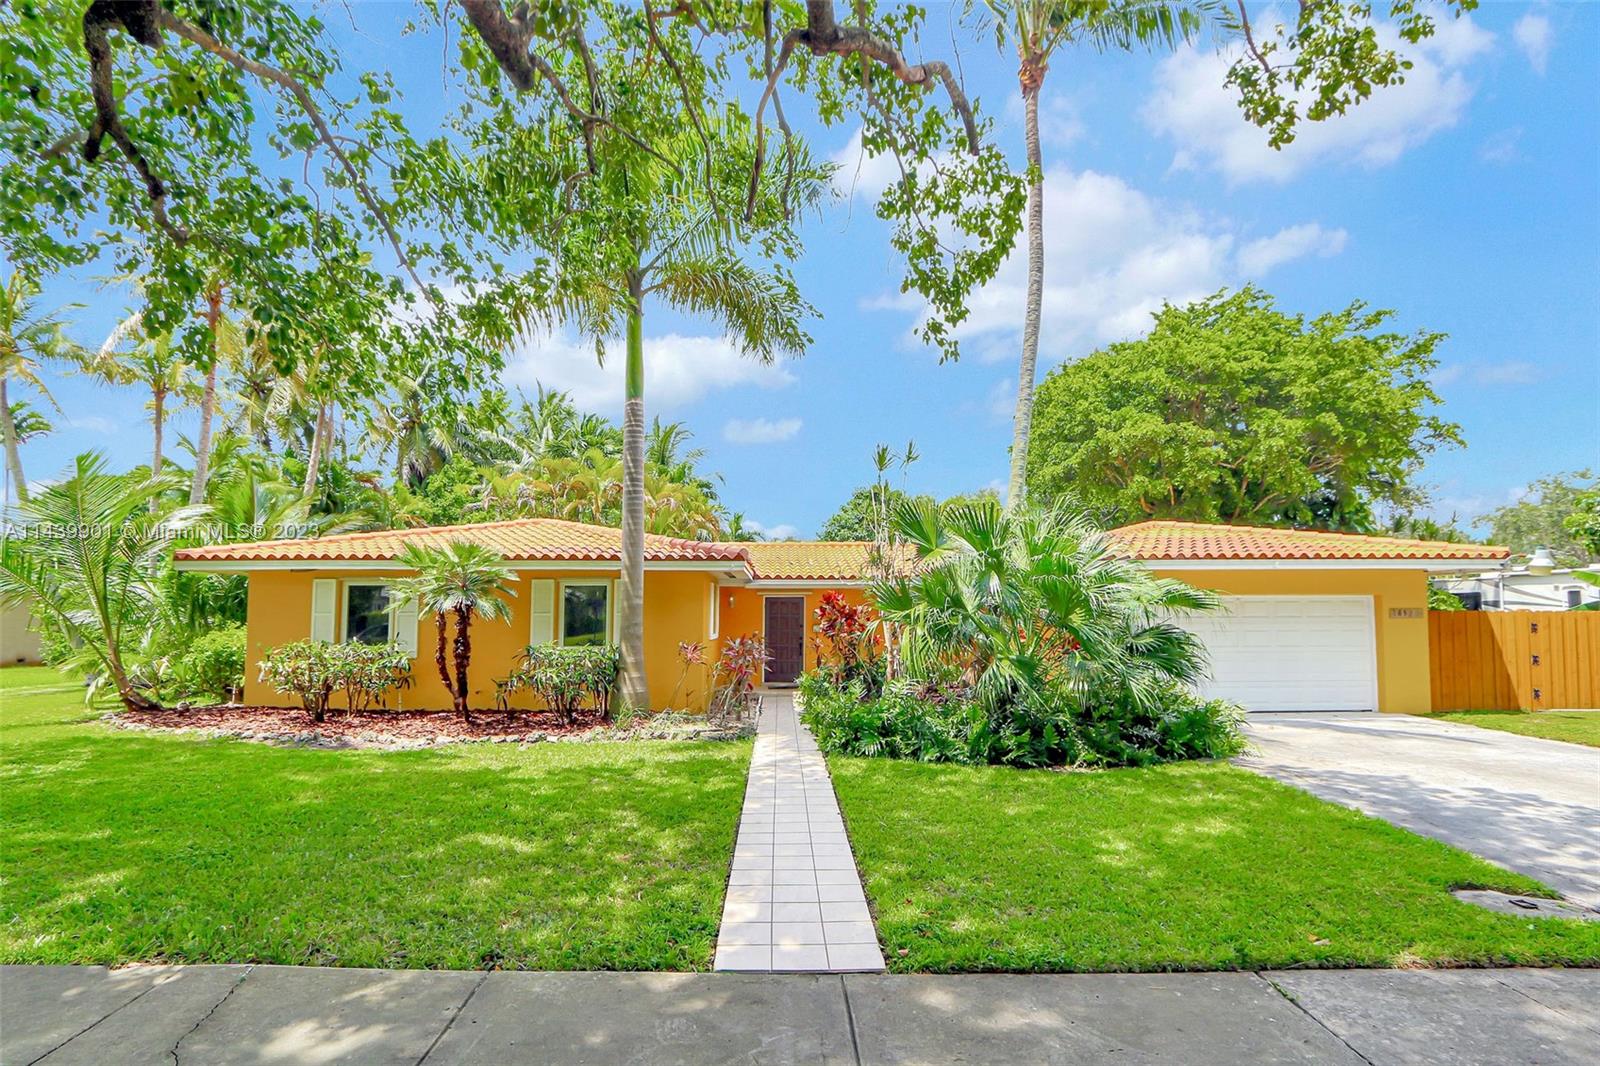 Spacious Palmetto Bay home nestled in a lovely, tree shaded and peaceful neighborhood, located on the no-through north side of 87 Avenue. This home is upgraded with IMPACT WINDOWS AND DOORS. BARREL TILE ROOF 2015. As you step inside, you are welcomed by the view of the pool. The kitchen area is oversized, allowing ample space for your own design plan. Nice family friendly layout with generously proportioned bedrooms. Enjoyable outdoor space with covered patio, freeform pool, and relaxing spa. The side yard offers the perfect space for a boat. Exceptional school district. A fabulous location to invest your family’s future in. Furniture is virtual.